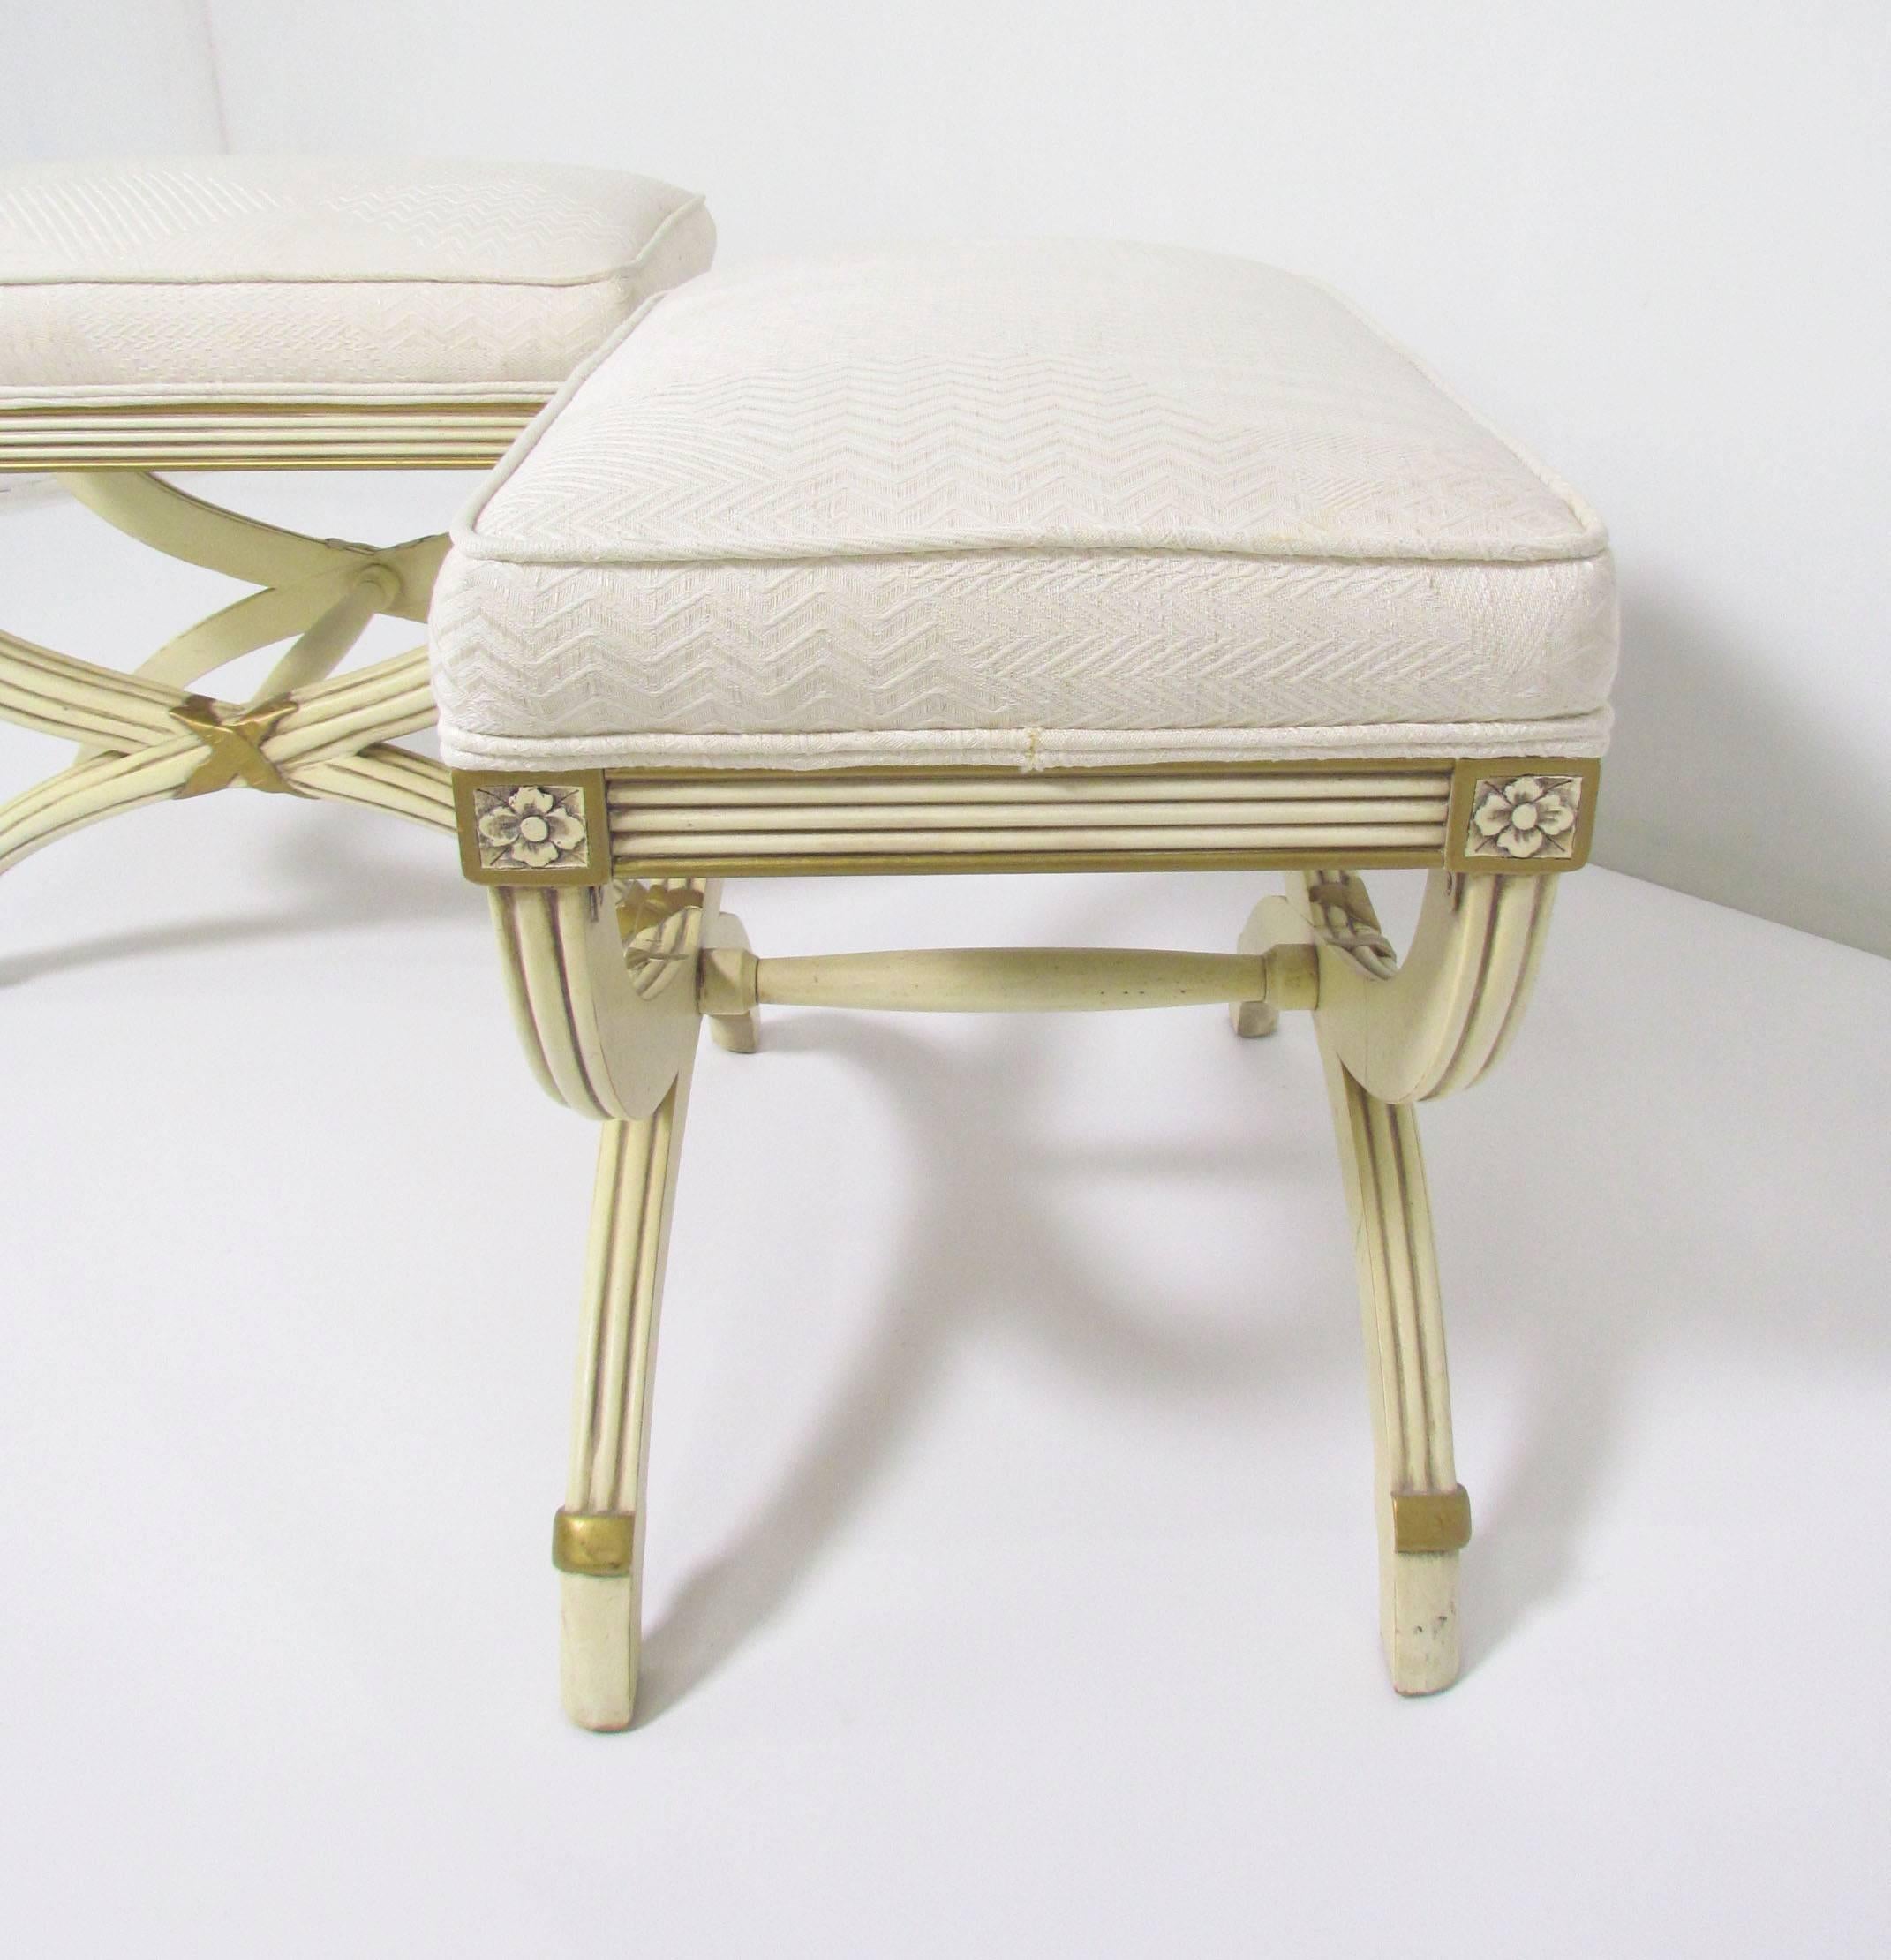 Pair of Hollywood Regency Style X-Base Stools by Karges Furniture 1